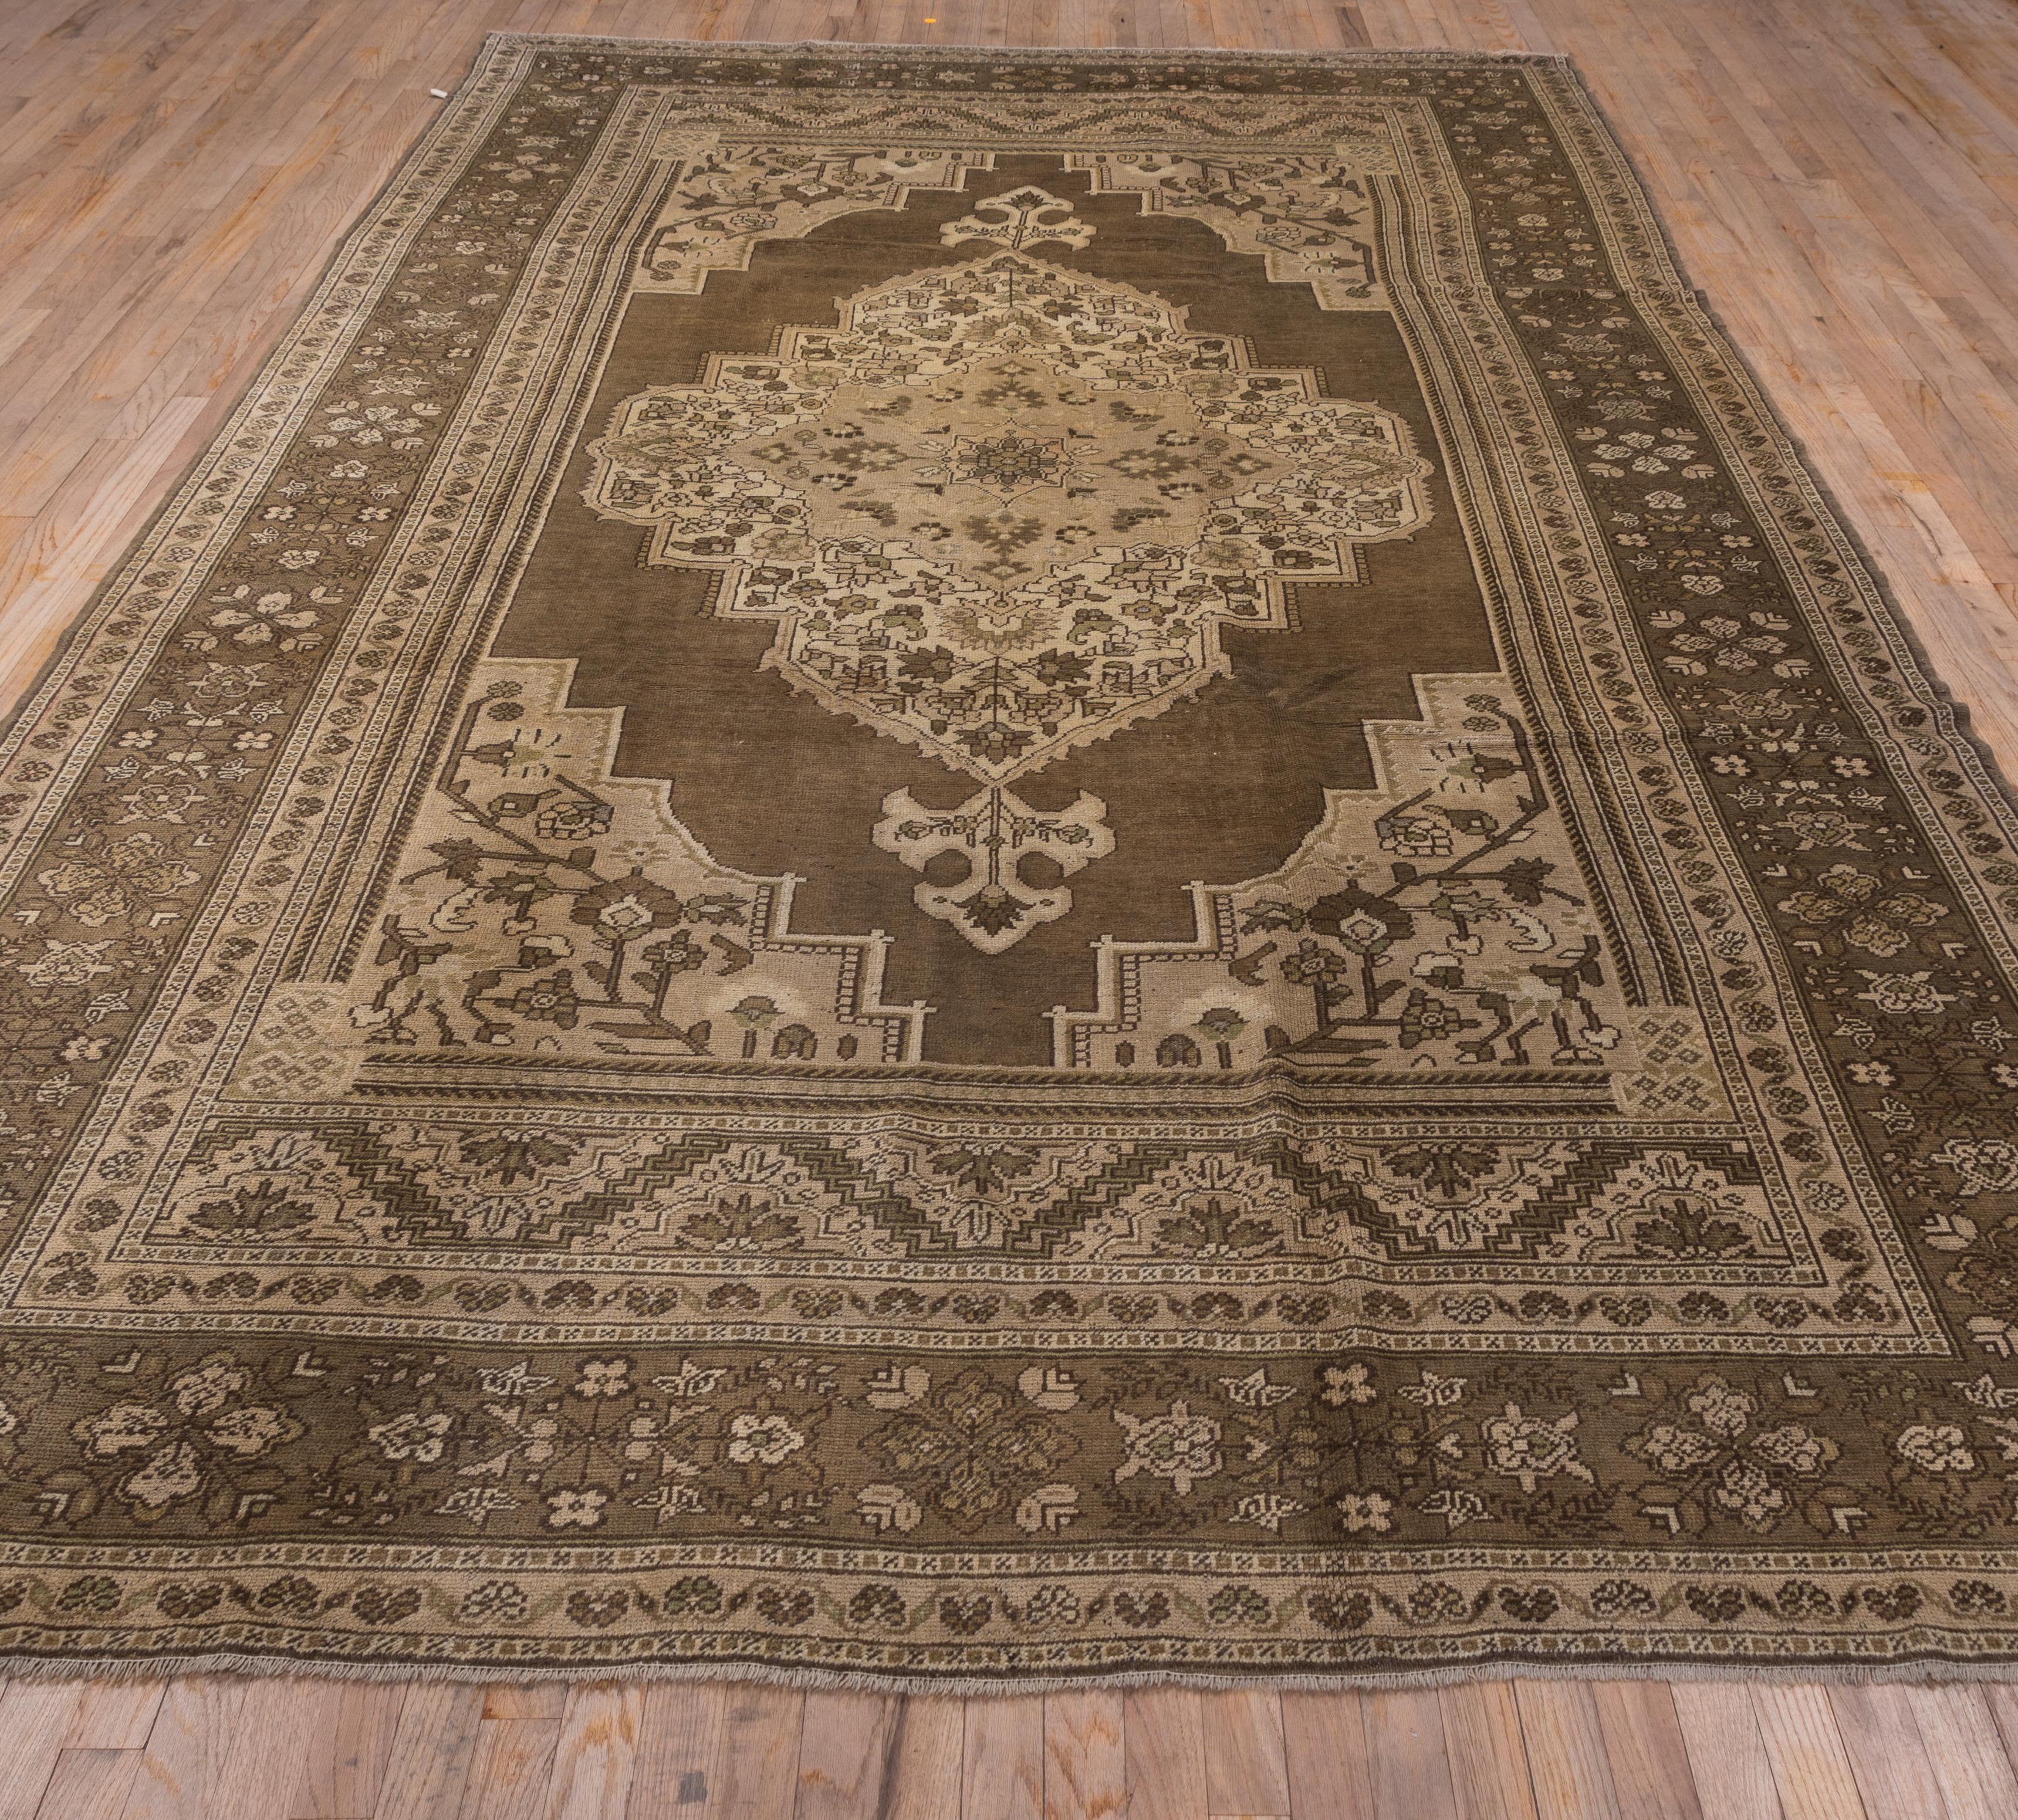 This moderately woven Turkish urban carpet shows extra zig-zag patterned panels at the field ends. The neutral open field displays an ecru stepped floral medallion with trefoil pendants. Border with floral crosses. Moderate weave.